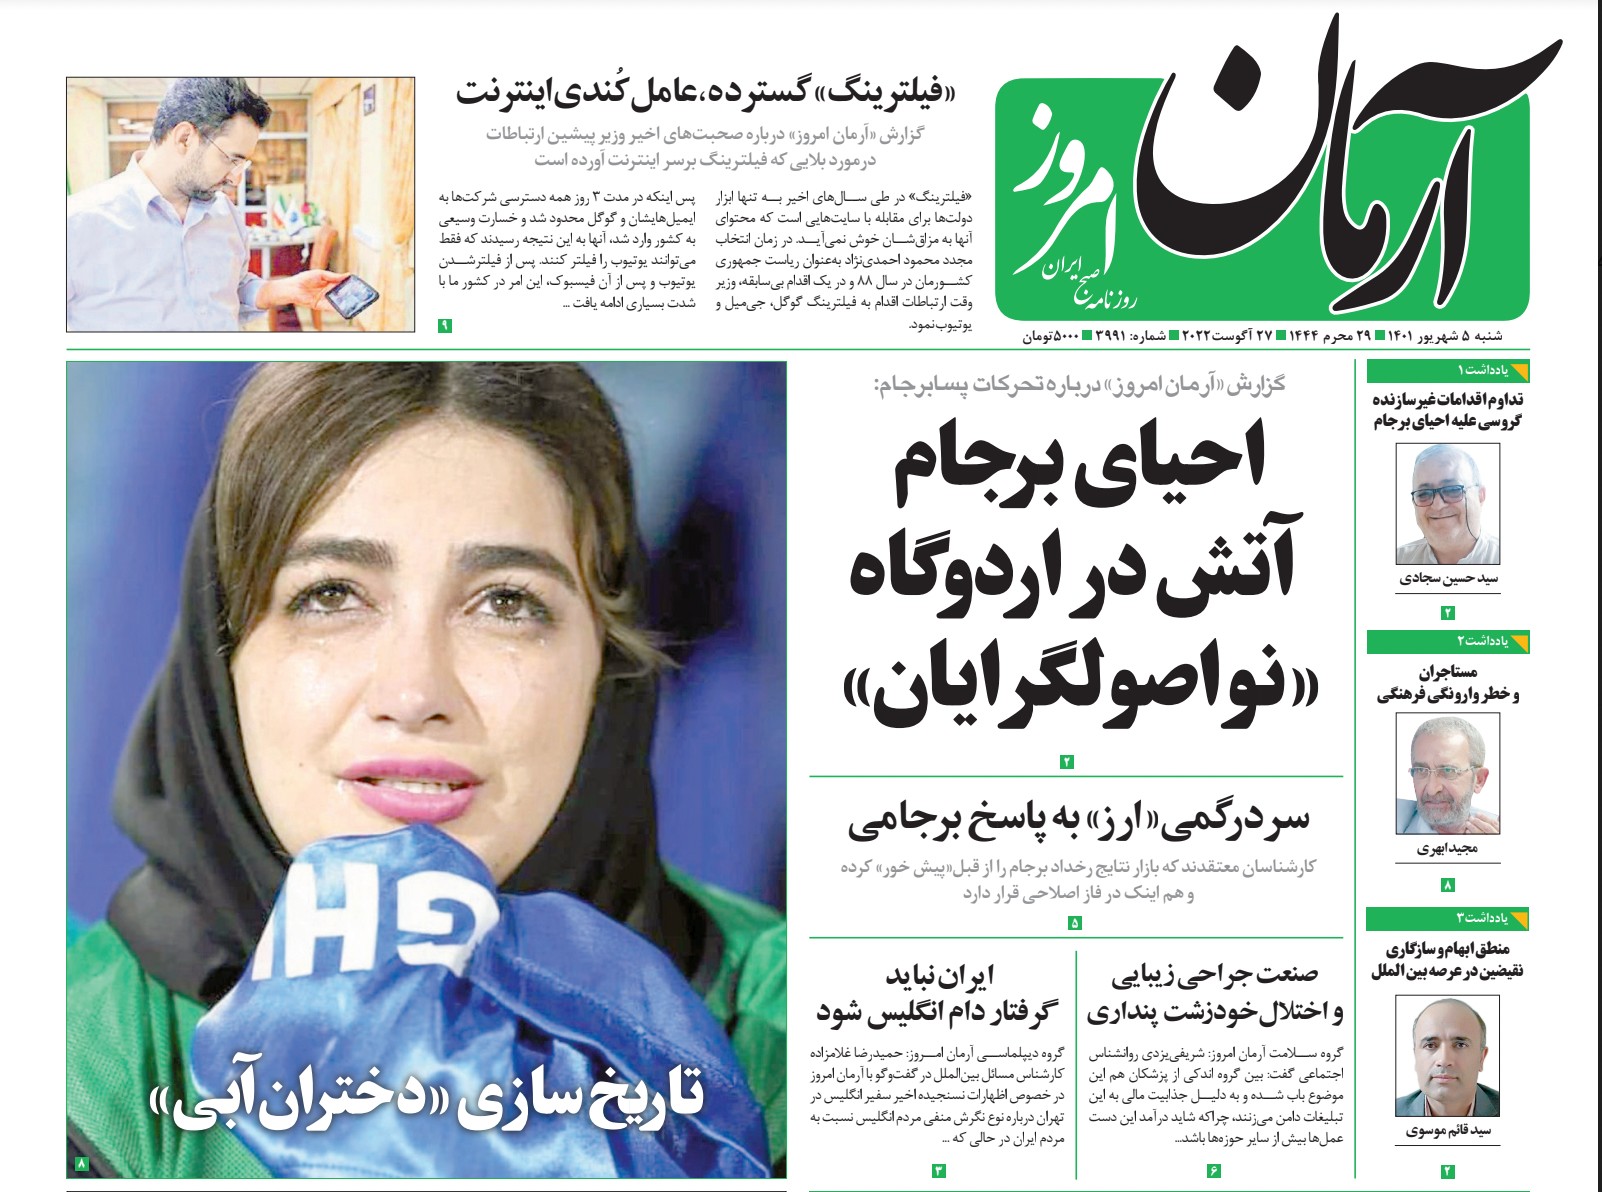 Iranian newspapers have had images of women at games for days